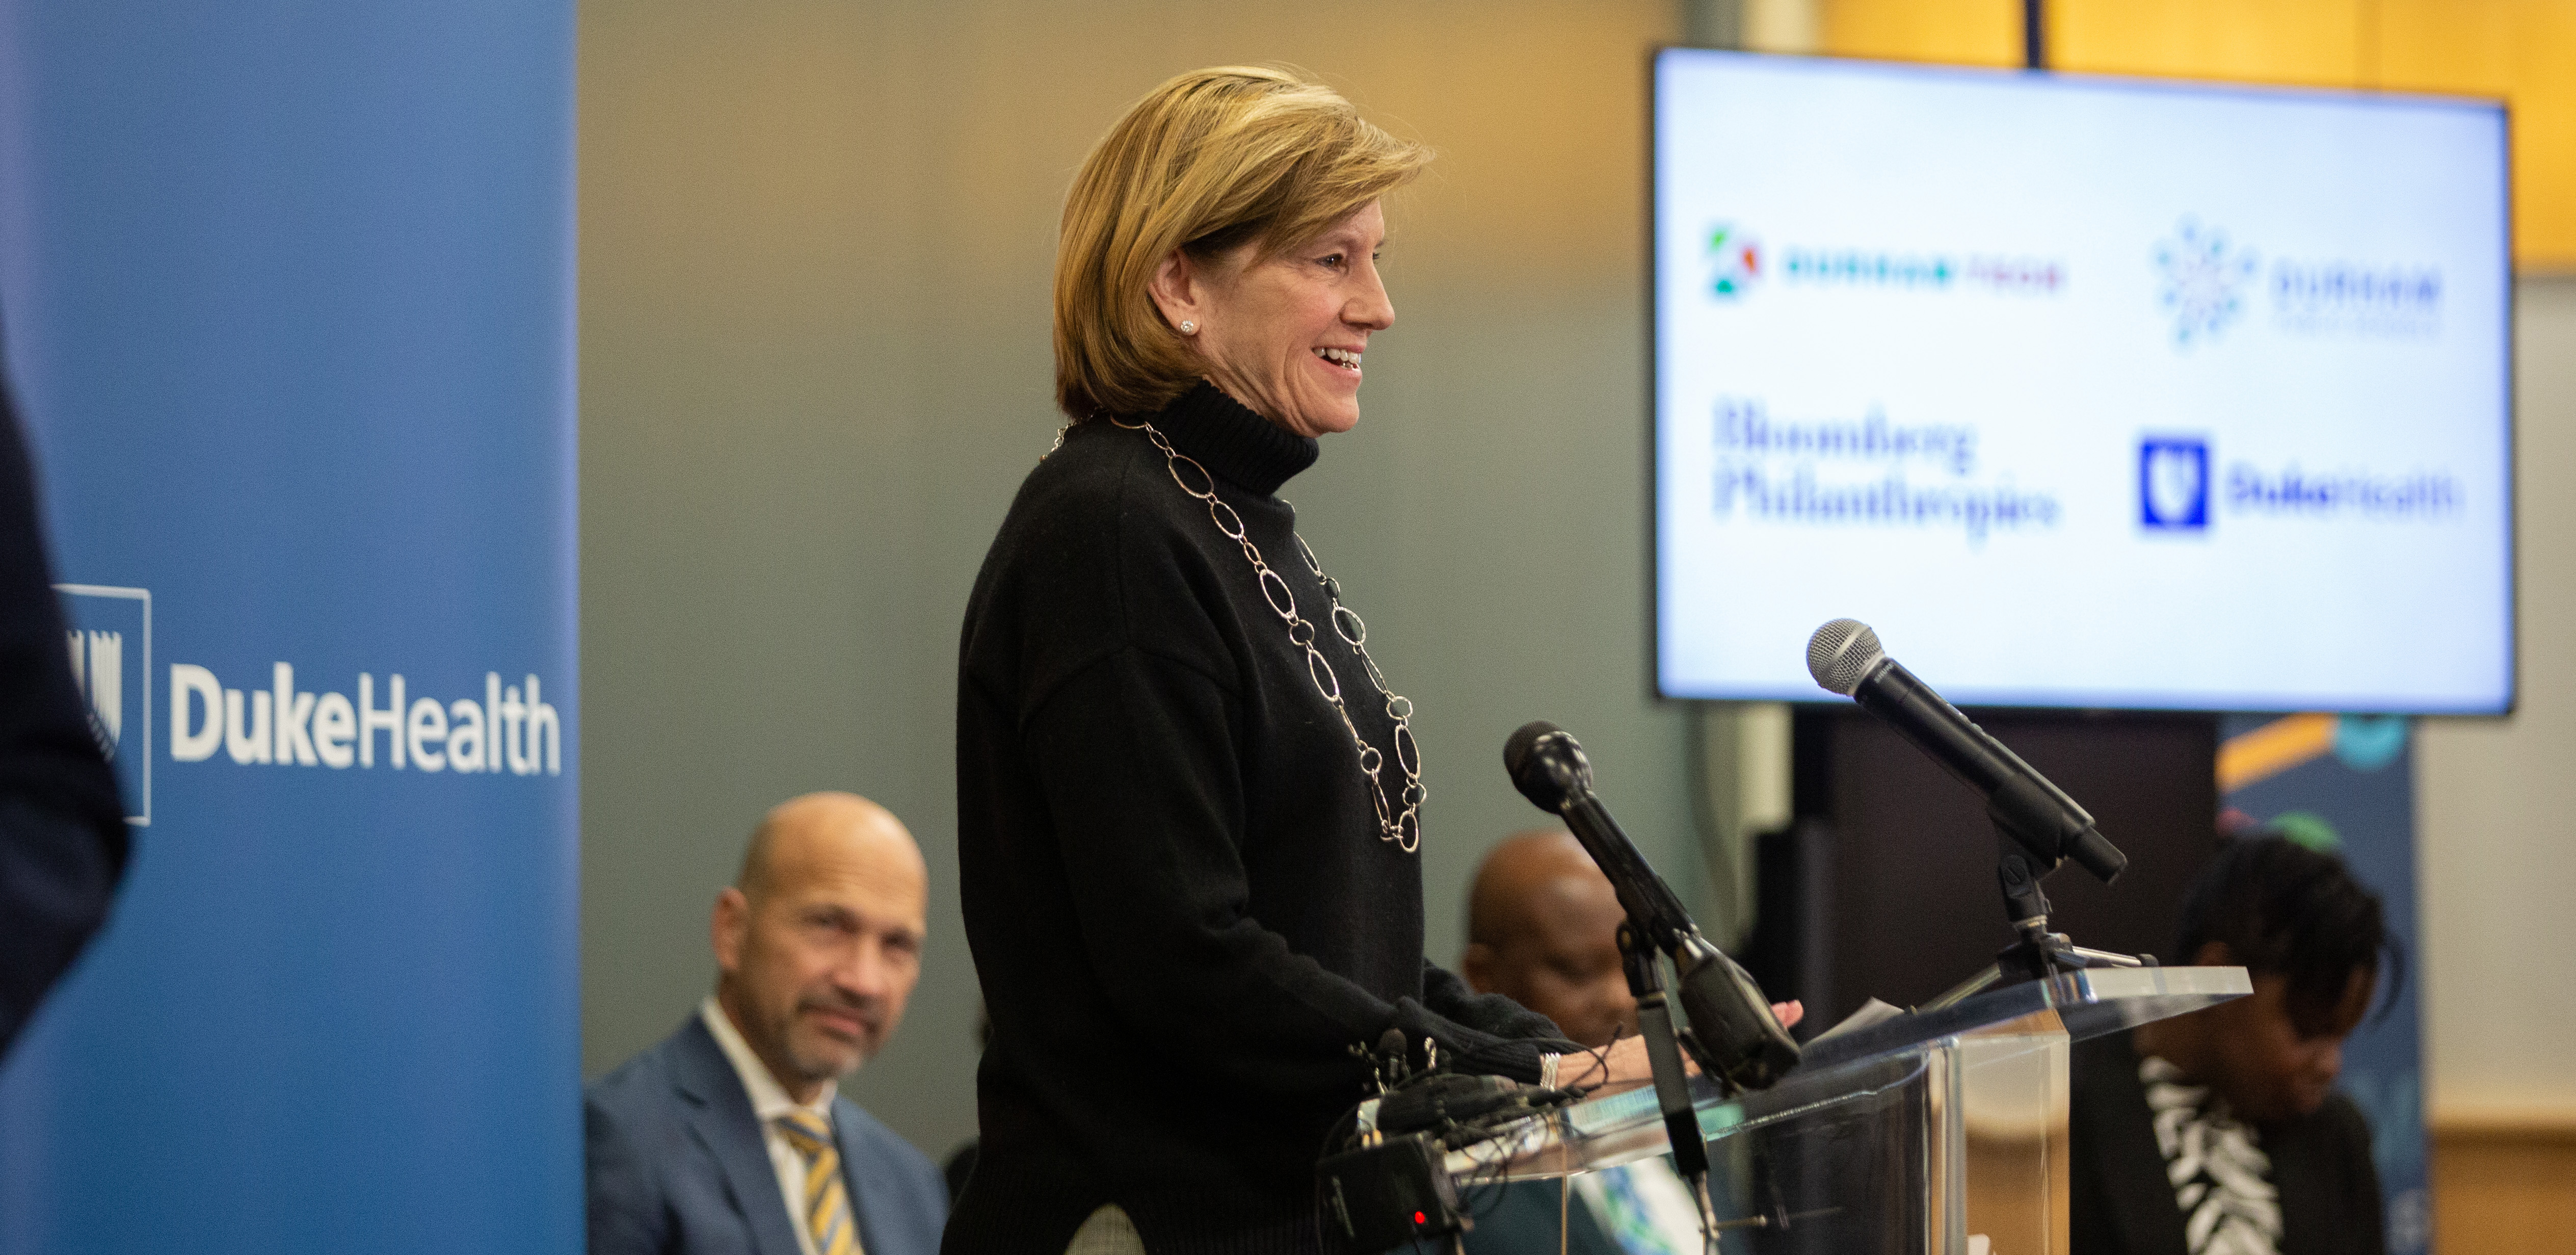 Mary E Klotman, MD, Executive Vice President for Health Affairs, Duke University, Dean, Duke University School of Medicine; and Chief Academic Officer, Duke Health speaking at the event with Craig Albanese, chief executive officer of Duke University Health System looks on. 